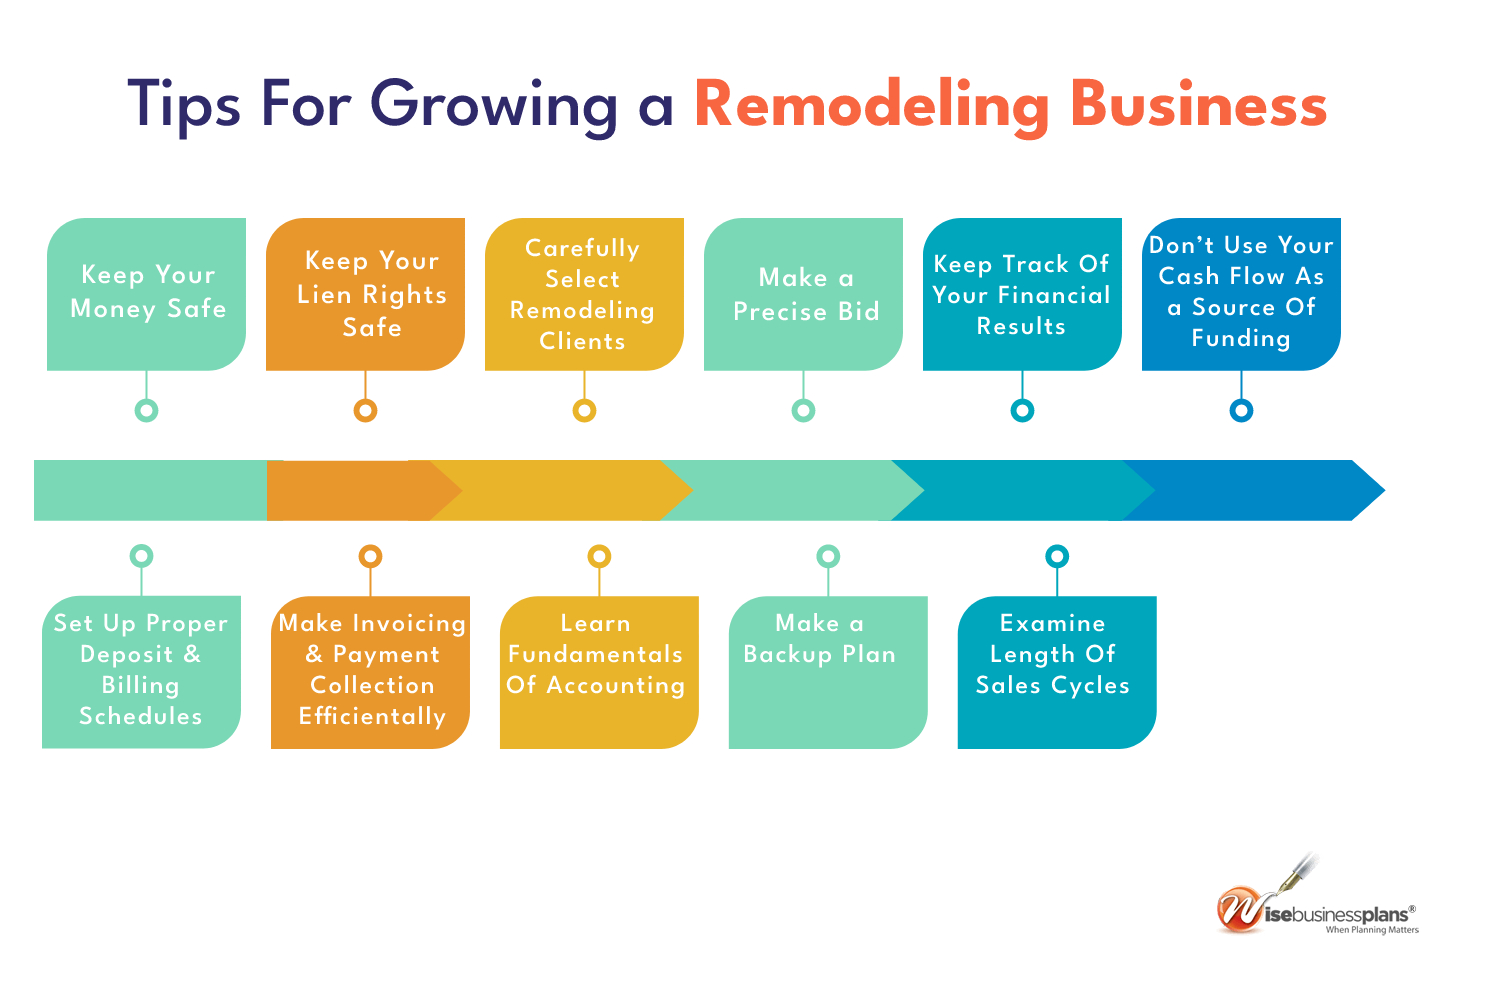 Tips for growing a remodeling business